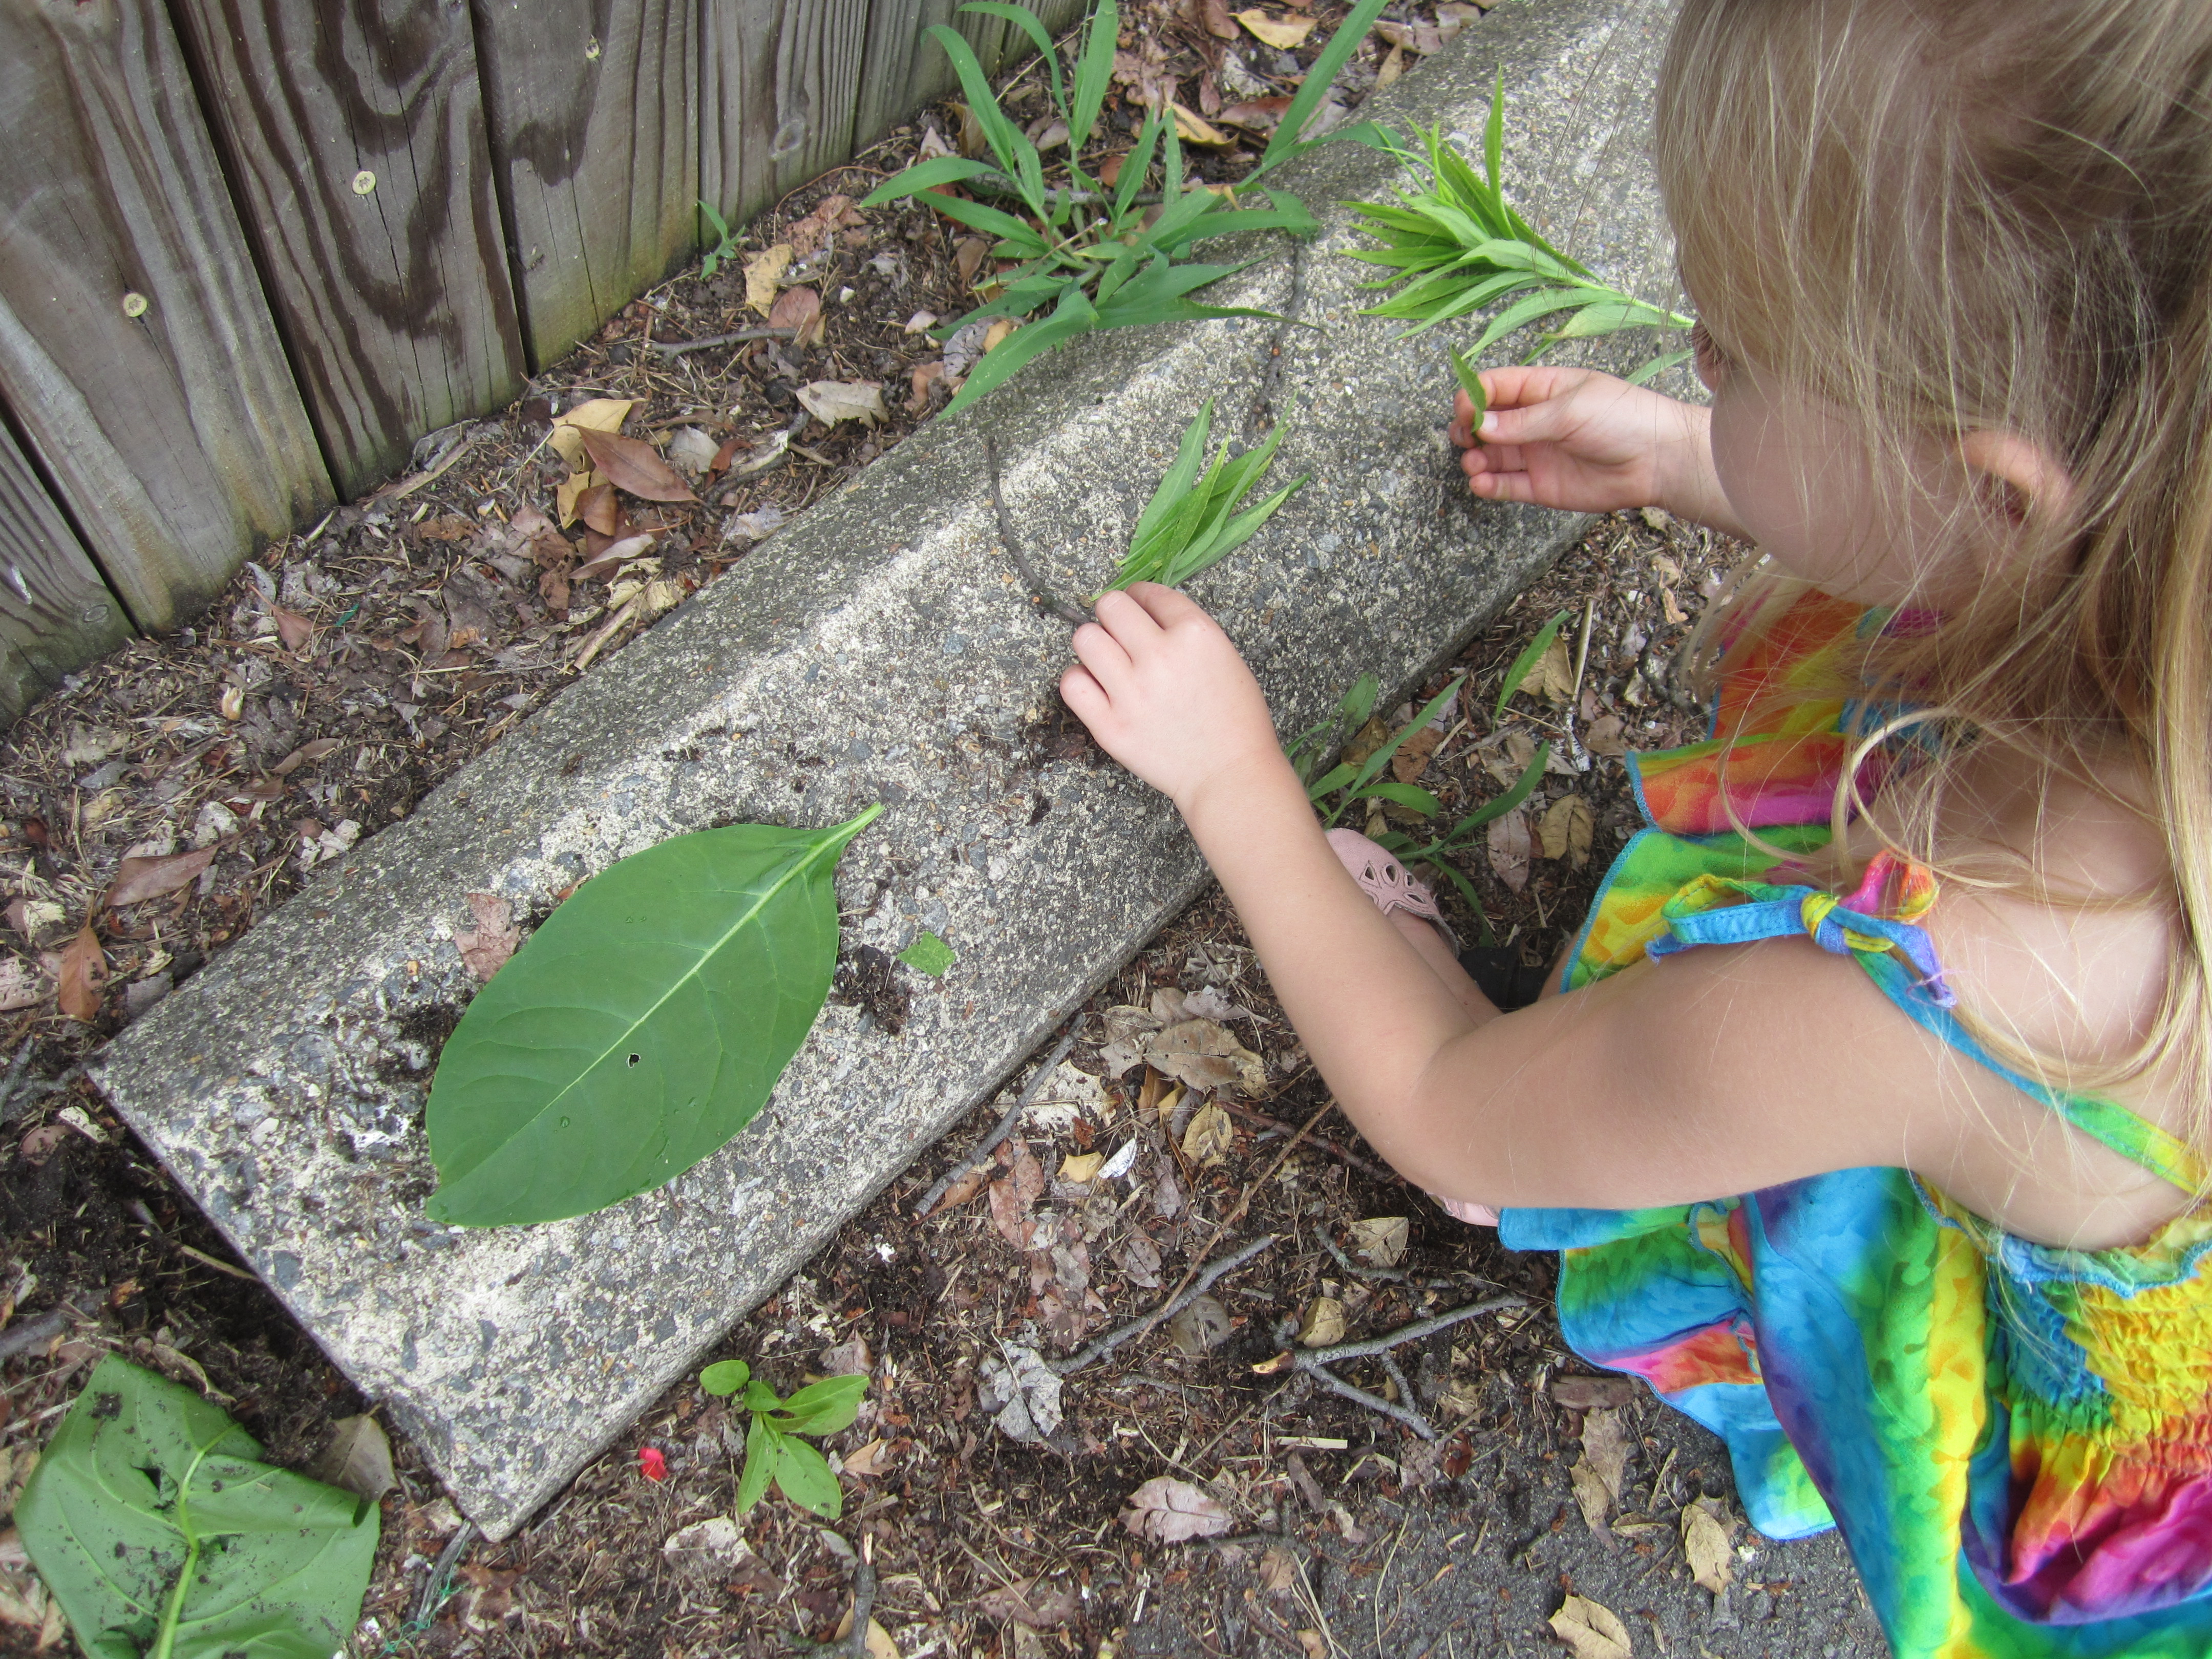 Child preparing play "food" from leaves.